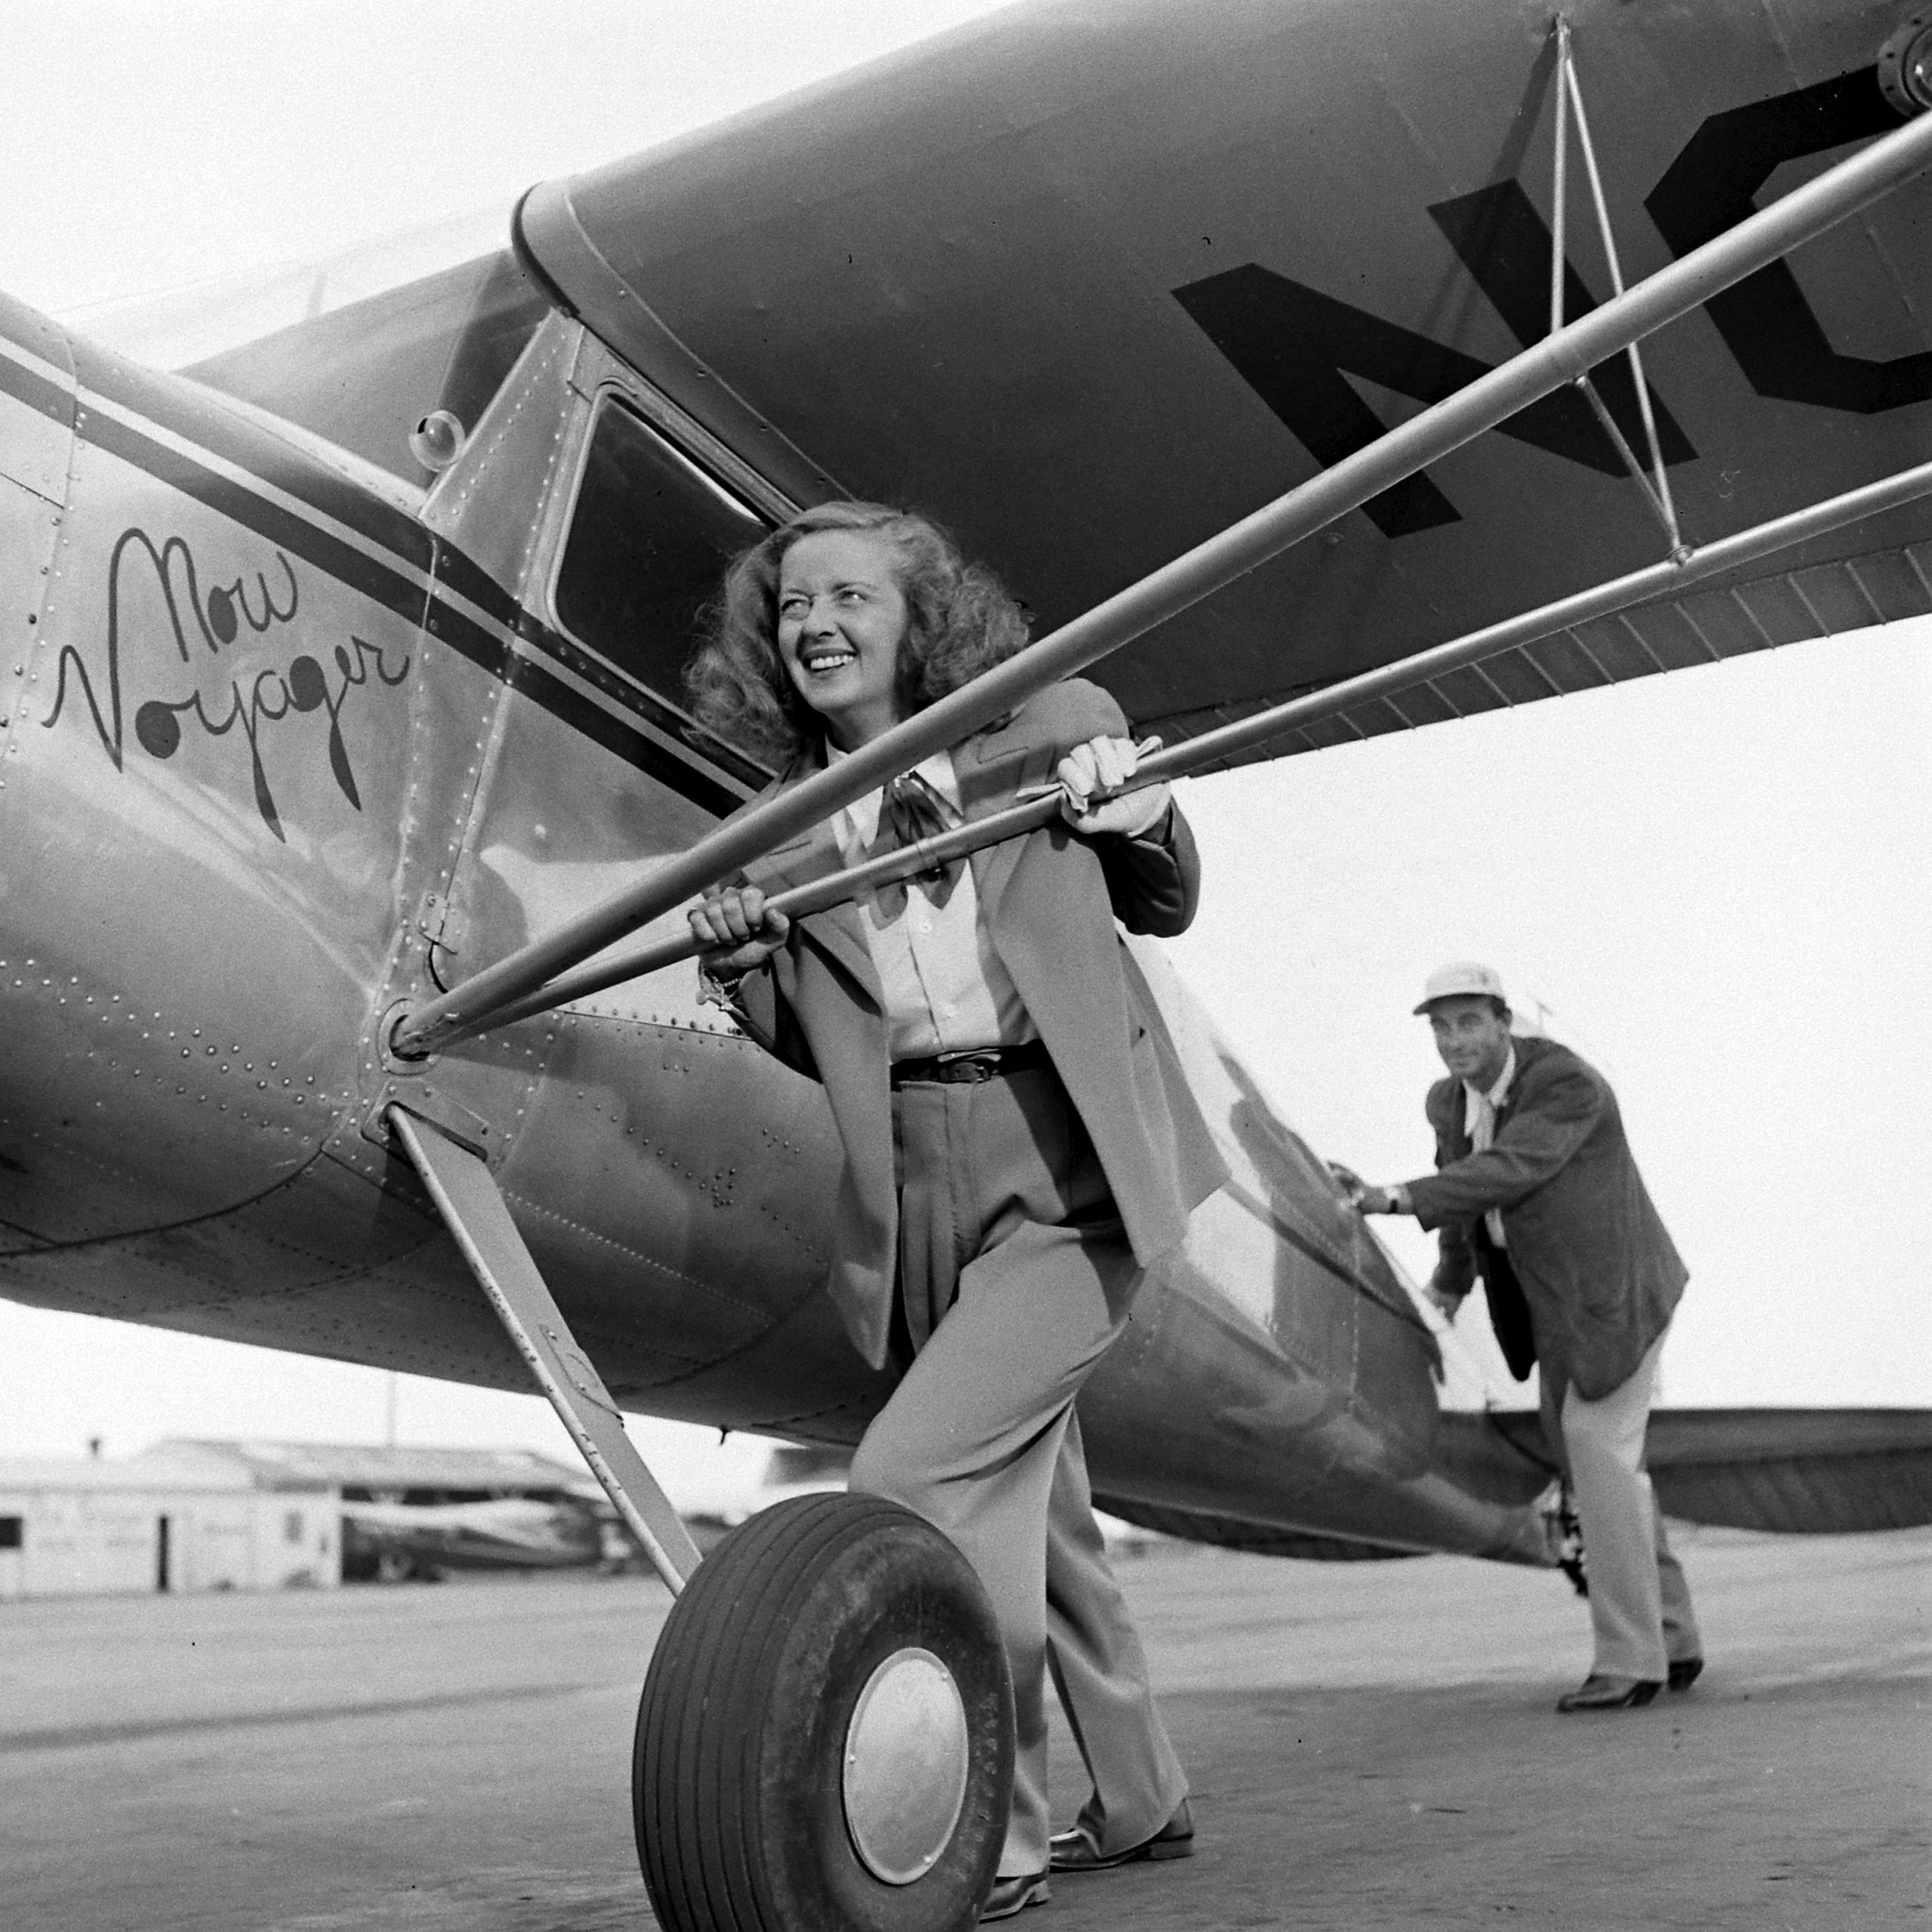 Bette Davis in front of a plane with her third husband, William Grant Sherry in California, 1947.